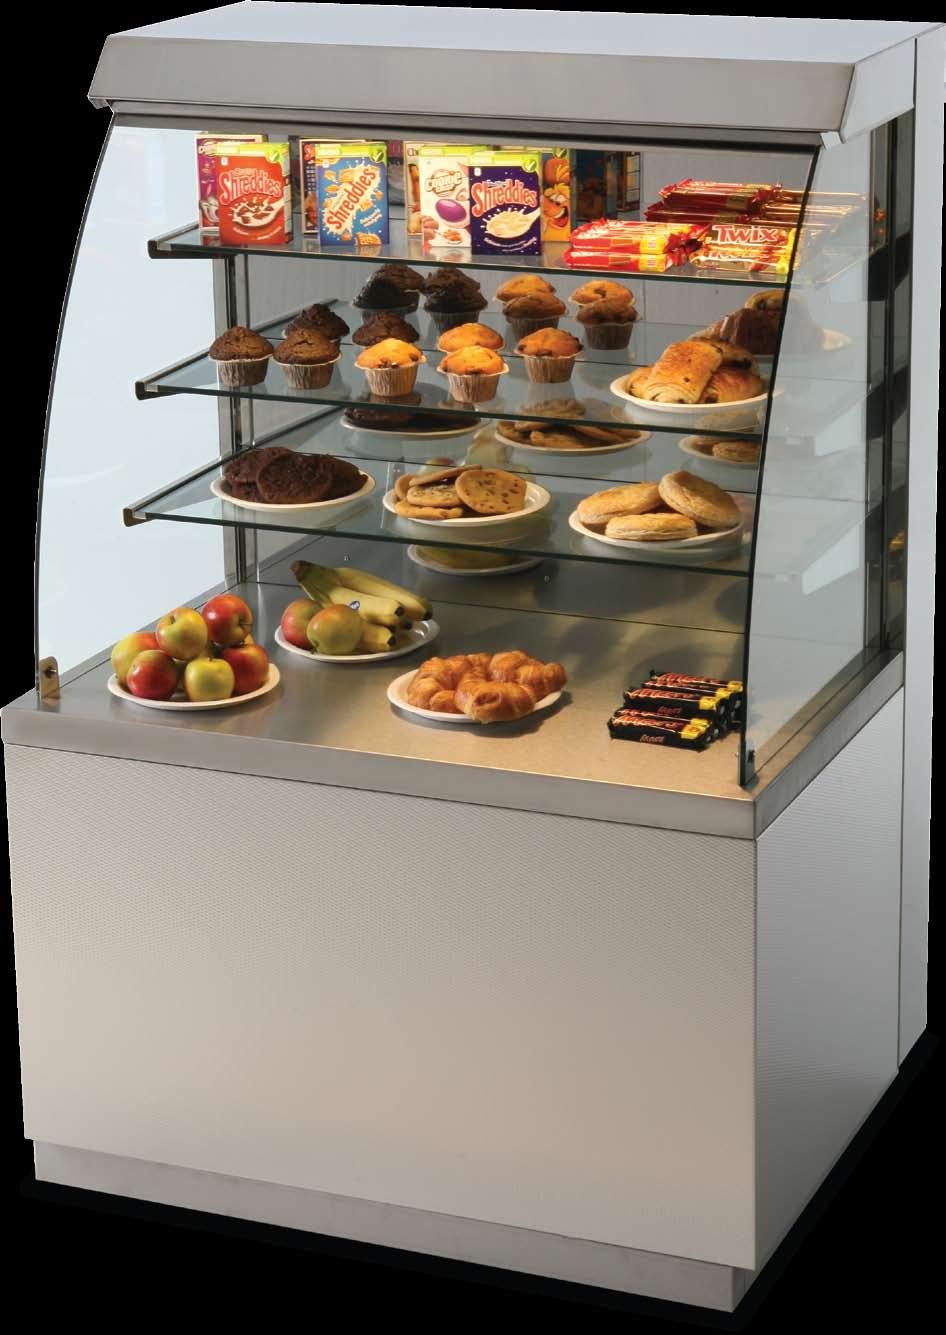 Ambient Models Victor Optimax ambient merchandising units are perfectly suited for delis, coffee shops, convenience stores and all food-to-go applications.